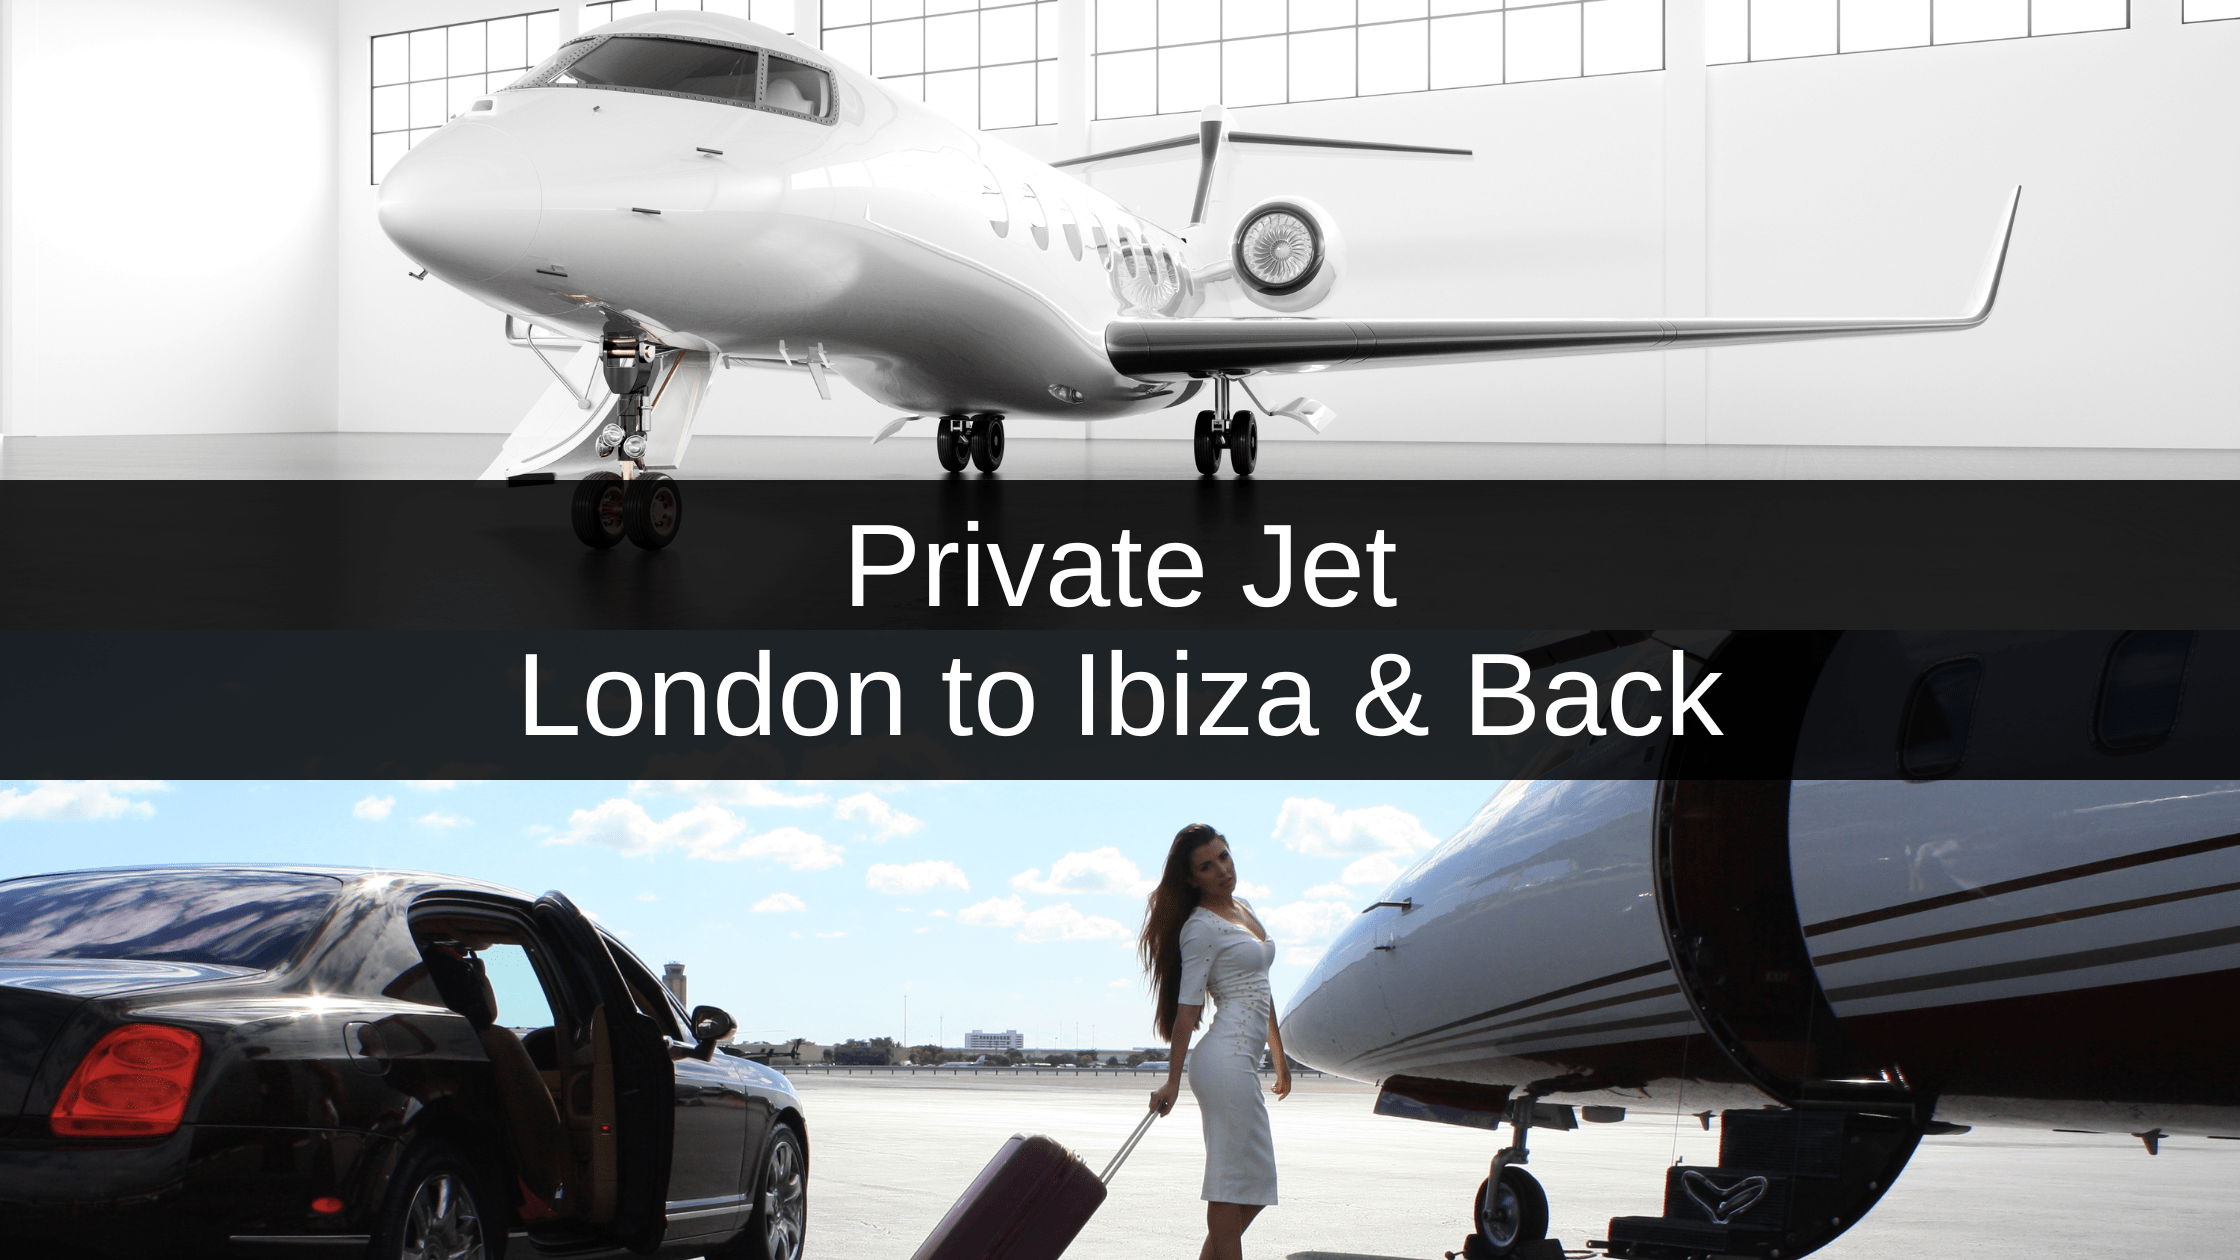 Private Jet from London to Ibiza & Back